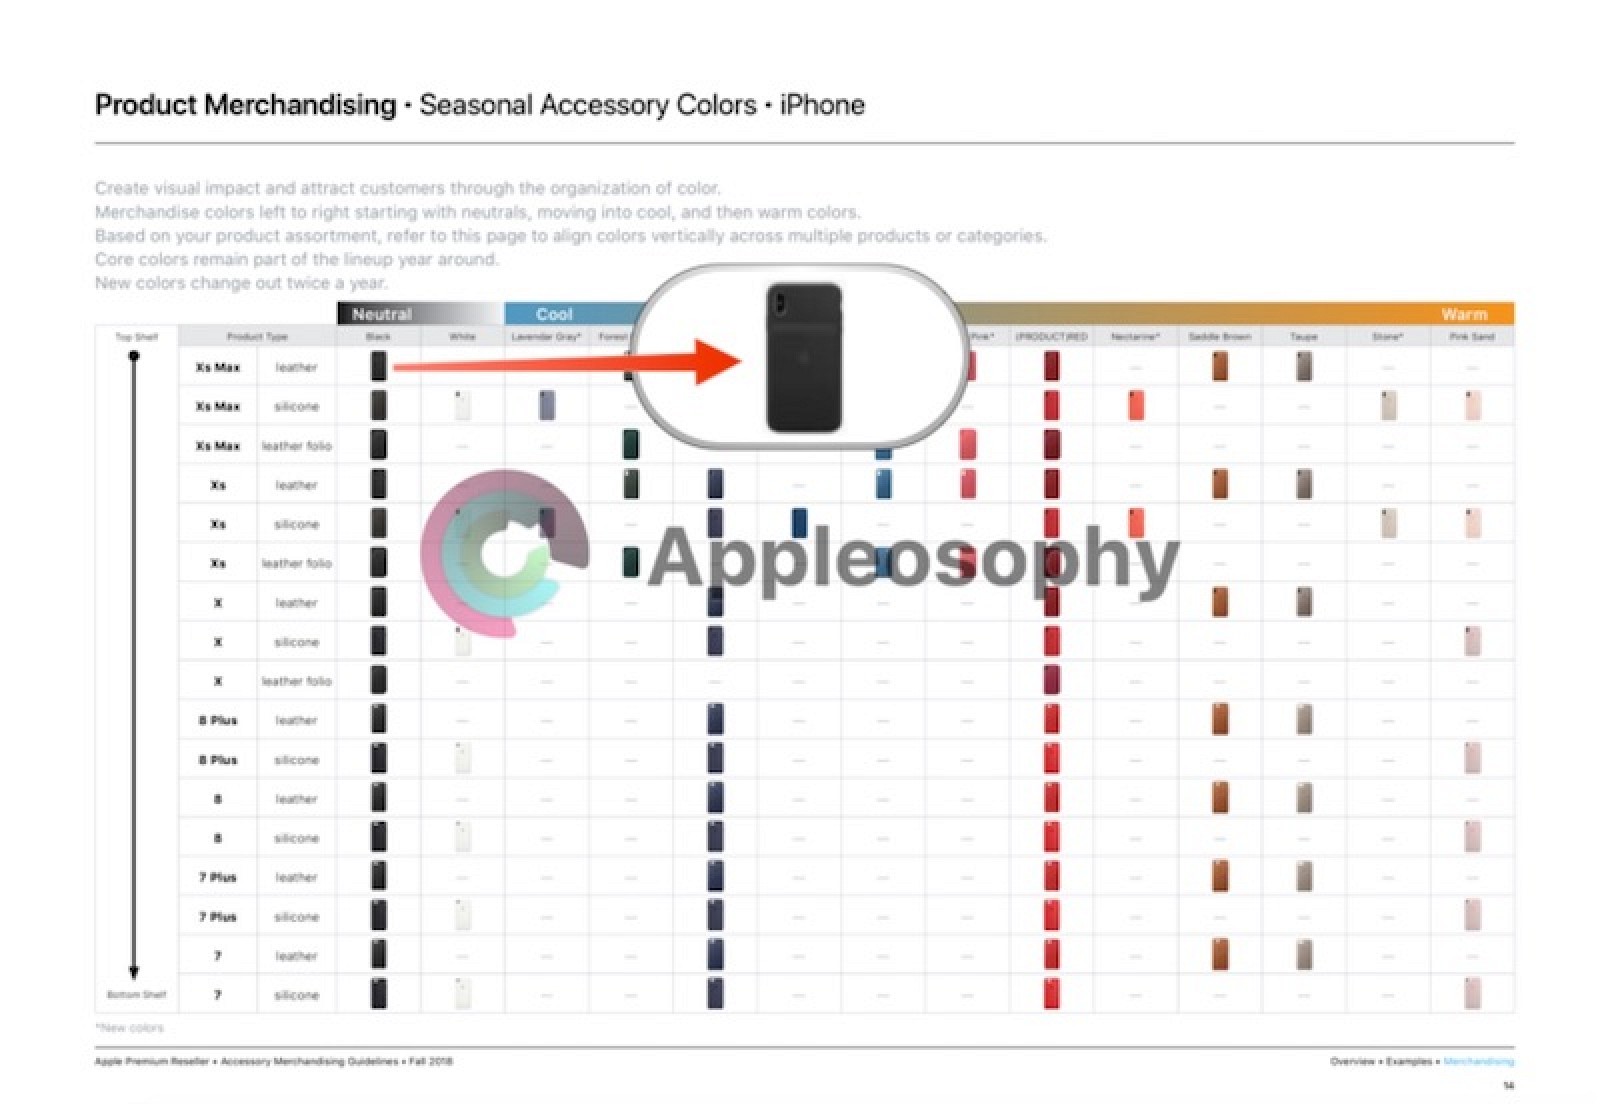 photo of iPhone XS and iPhone XS Max Smart Battery Cases Spotted in Apple's Fall 2018 Merchandising Guide image